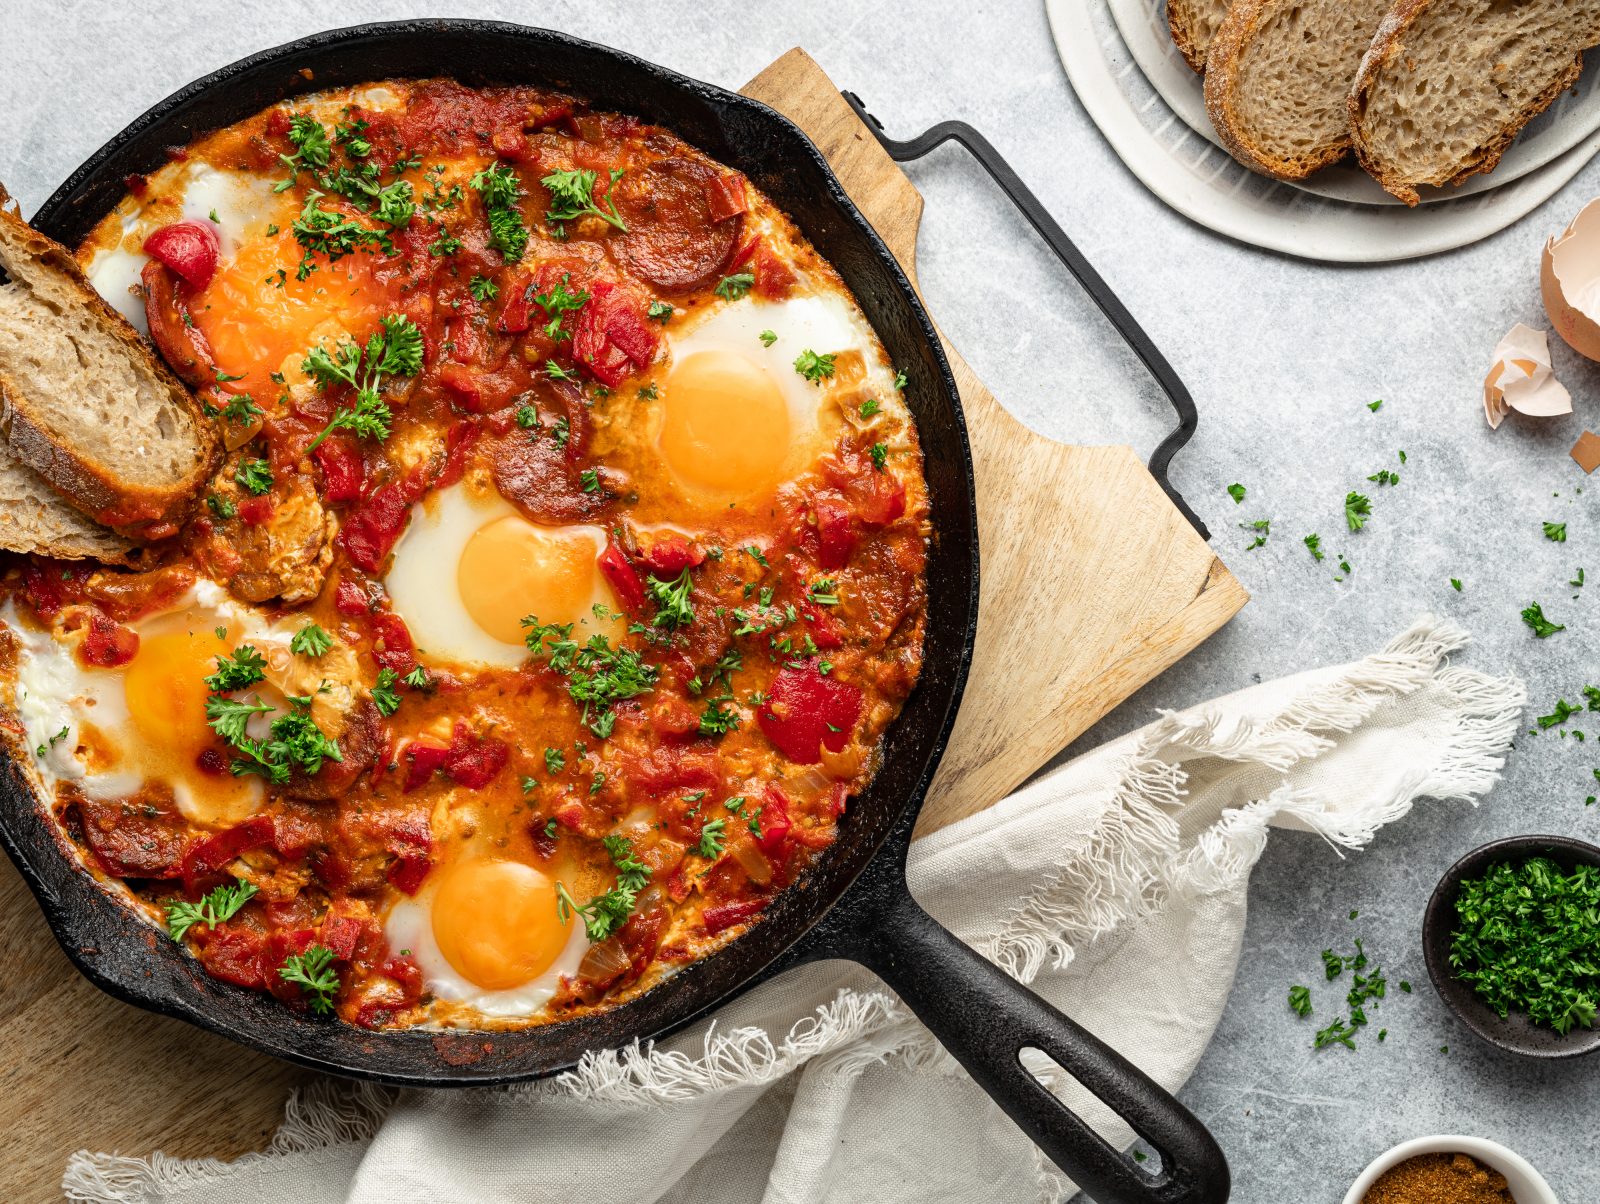 Dandenong Market — Breakfast baked shakshuka with a spicy tomato and ...